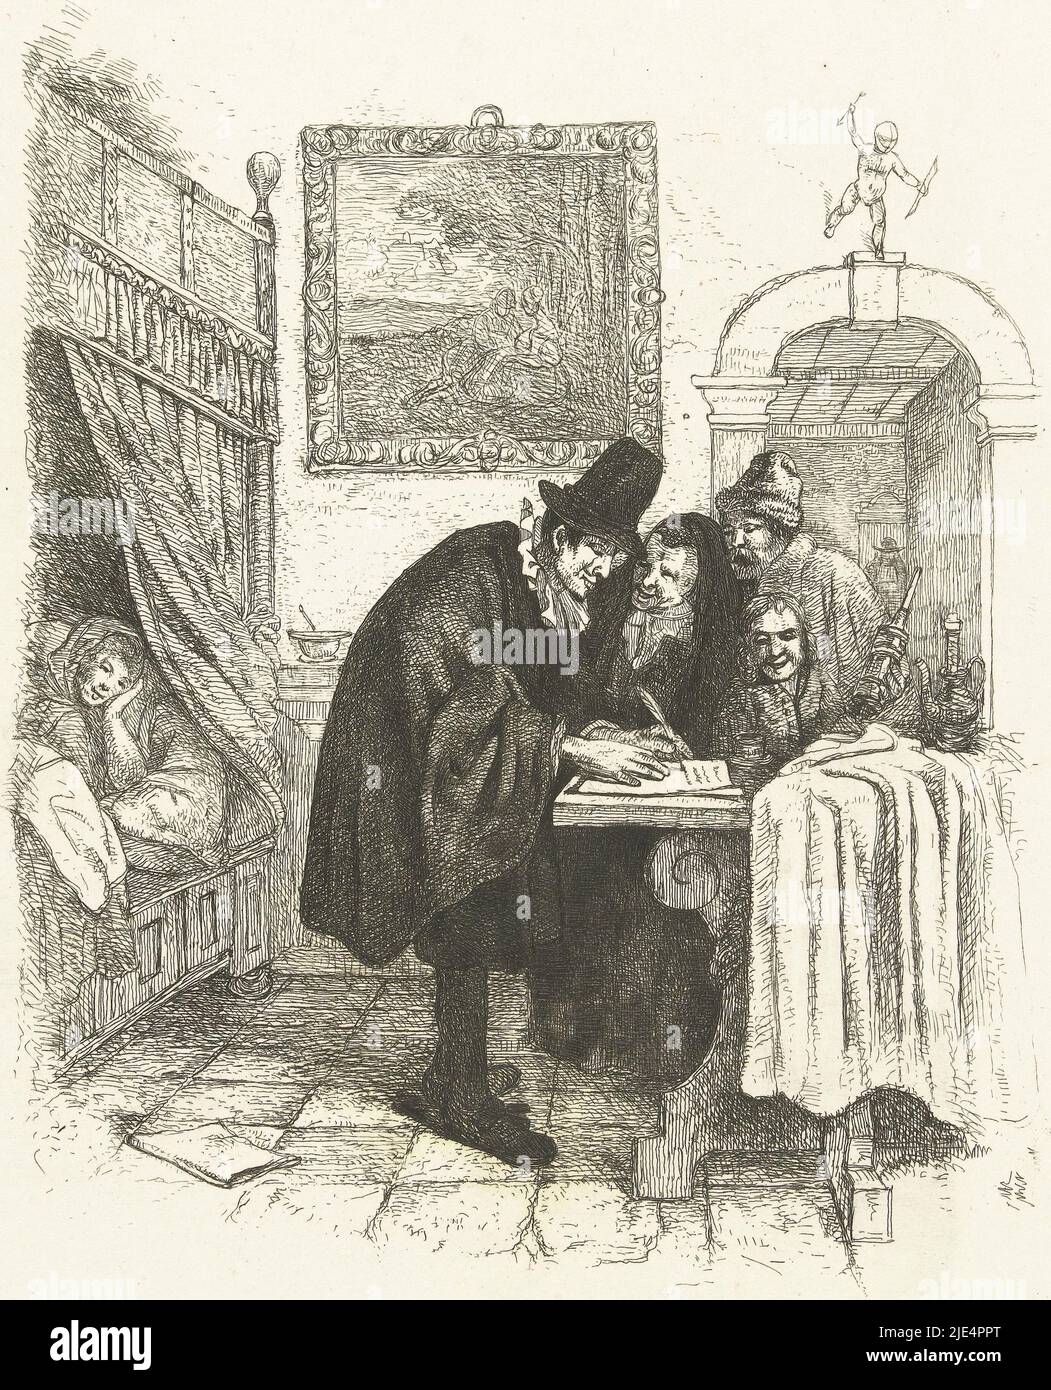 A doctor writes a prescription standing at a table. An old woman, a man with a clyster and a boy are watching. The patient, a sick woman, is lying in bed. In the interior, a painting hangs on the wall with a pastoral scene. On top of the bar is a small statue of Amor, Doctor on a home visit to a sick woman., print maker: Albertus Brondgeest, after: Jan Havicksz. Steen, Netherlands, 1796 - 1849, paper, etching, h 249 mm × w 164 mm Stock Photo